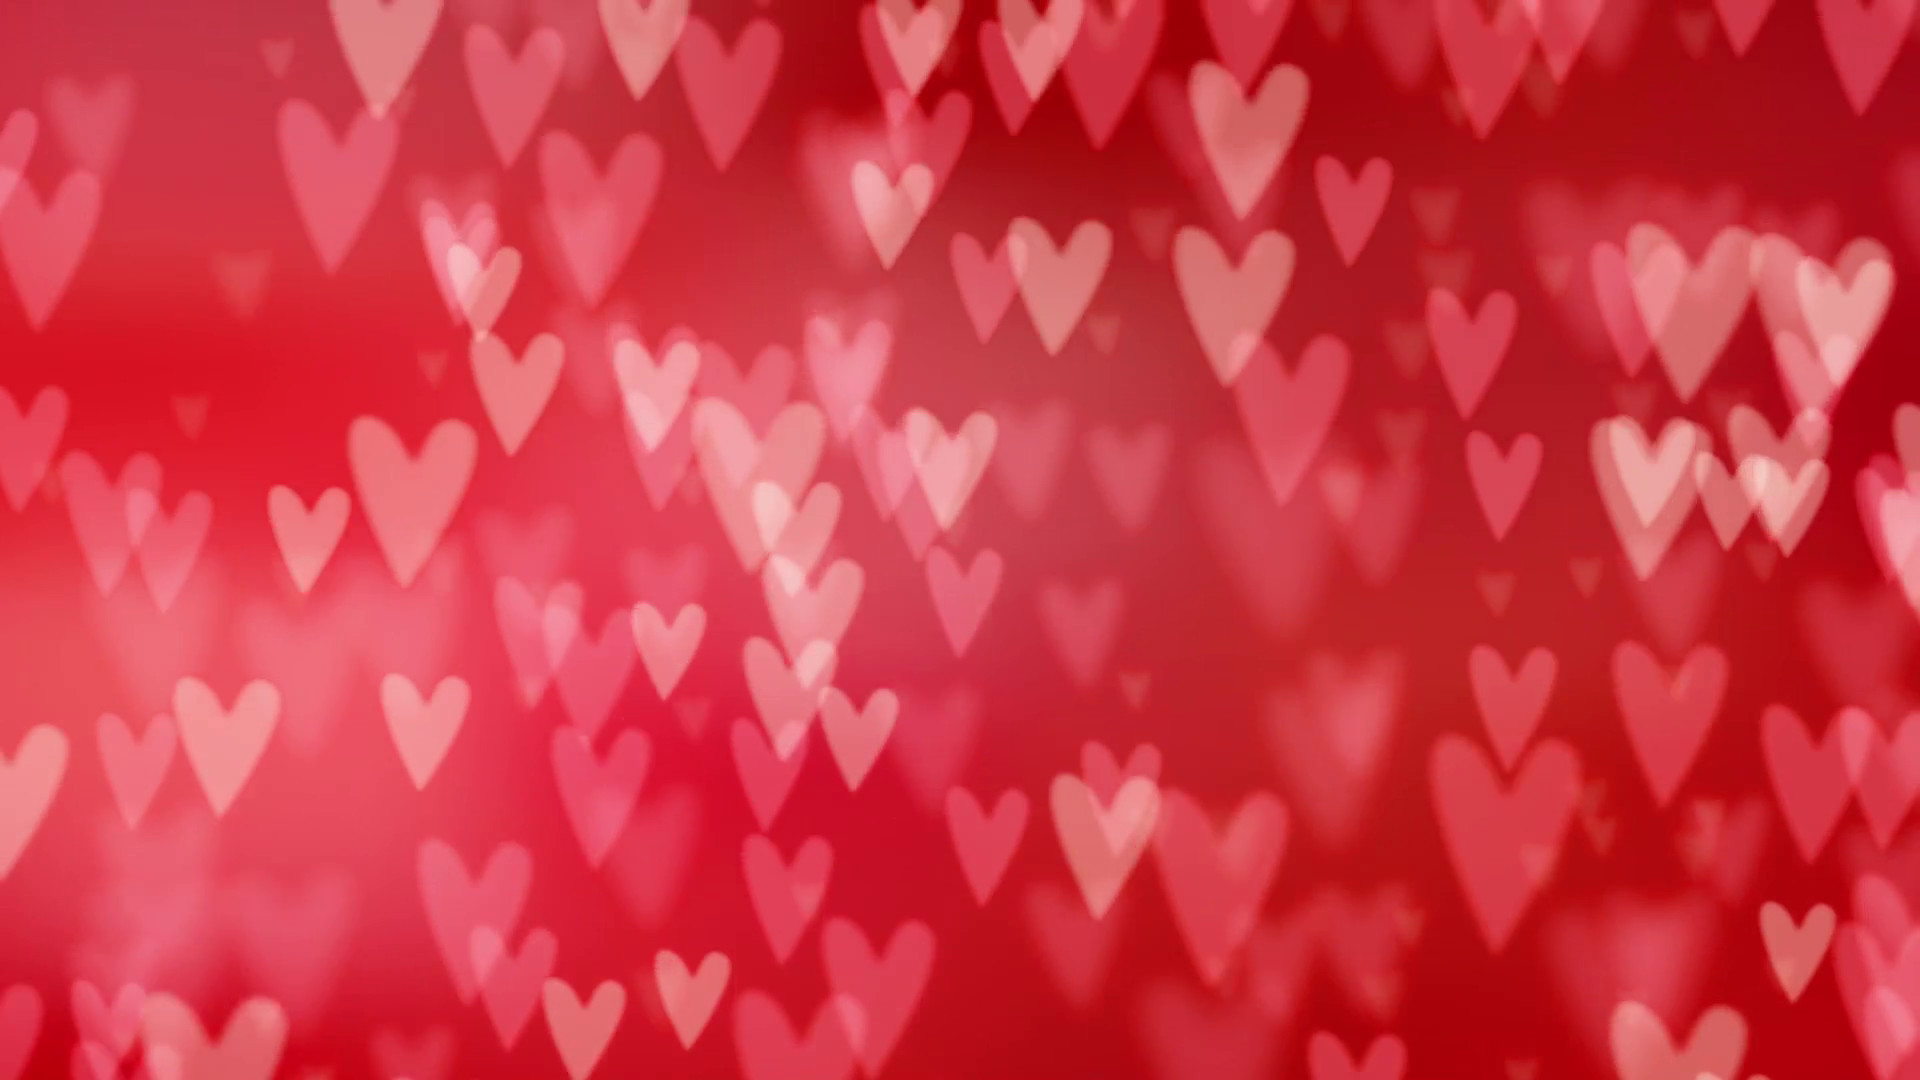 1920x1080 798467-cool-red-hearts-background-.jpg